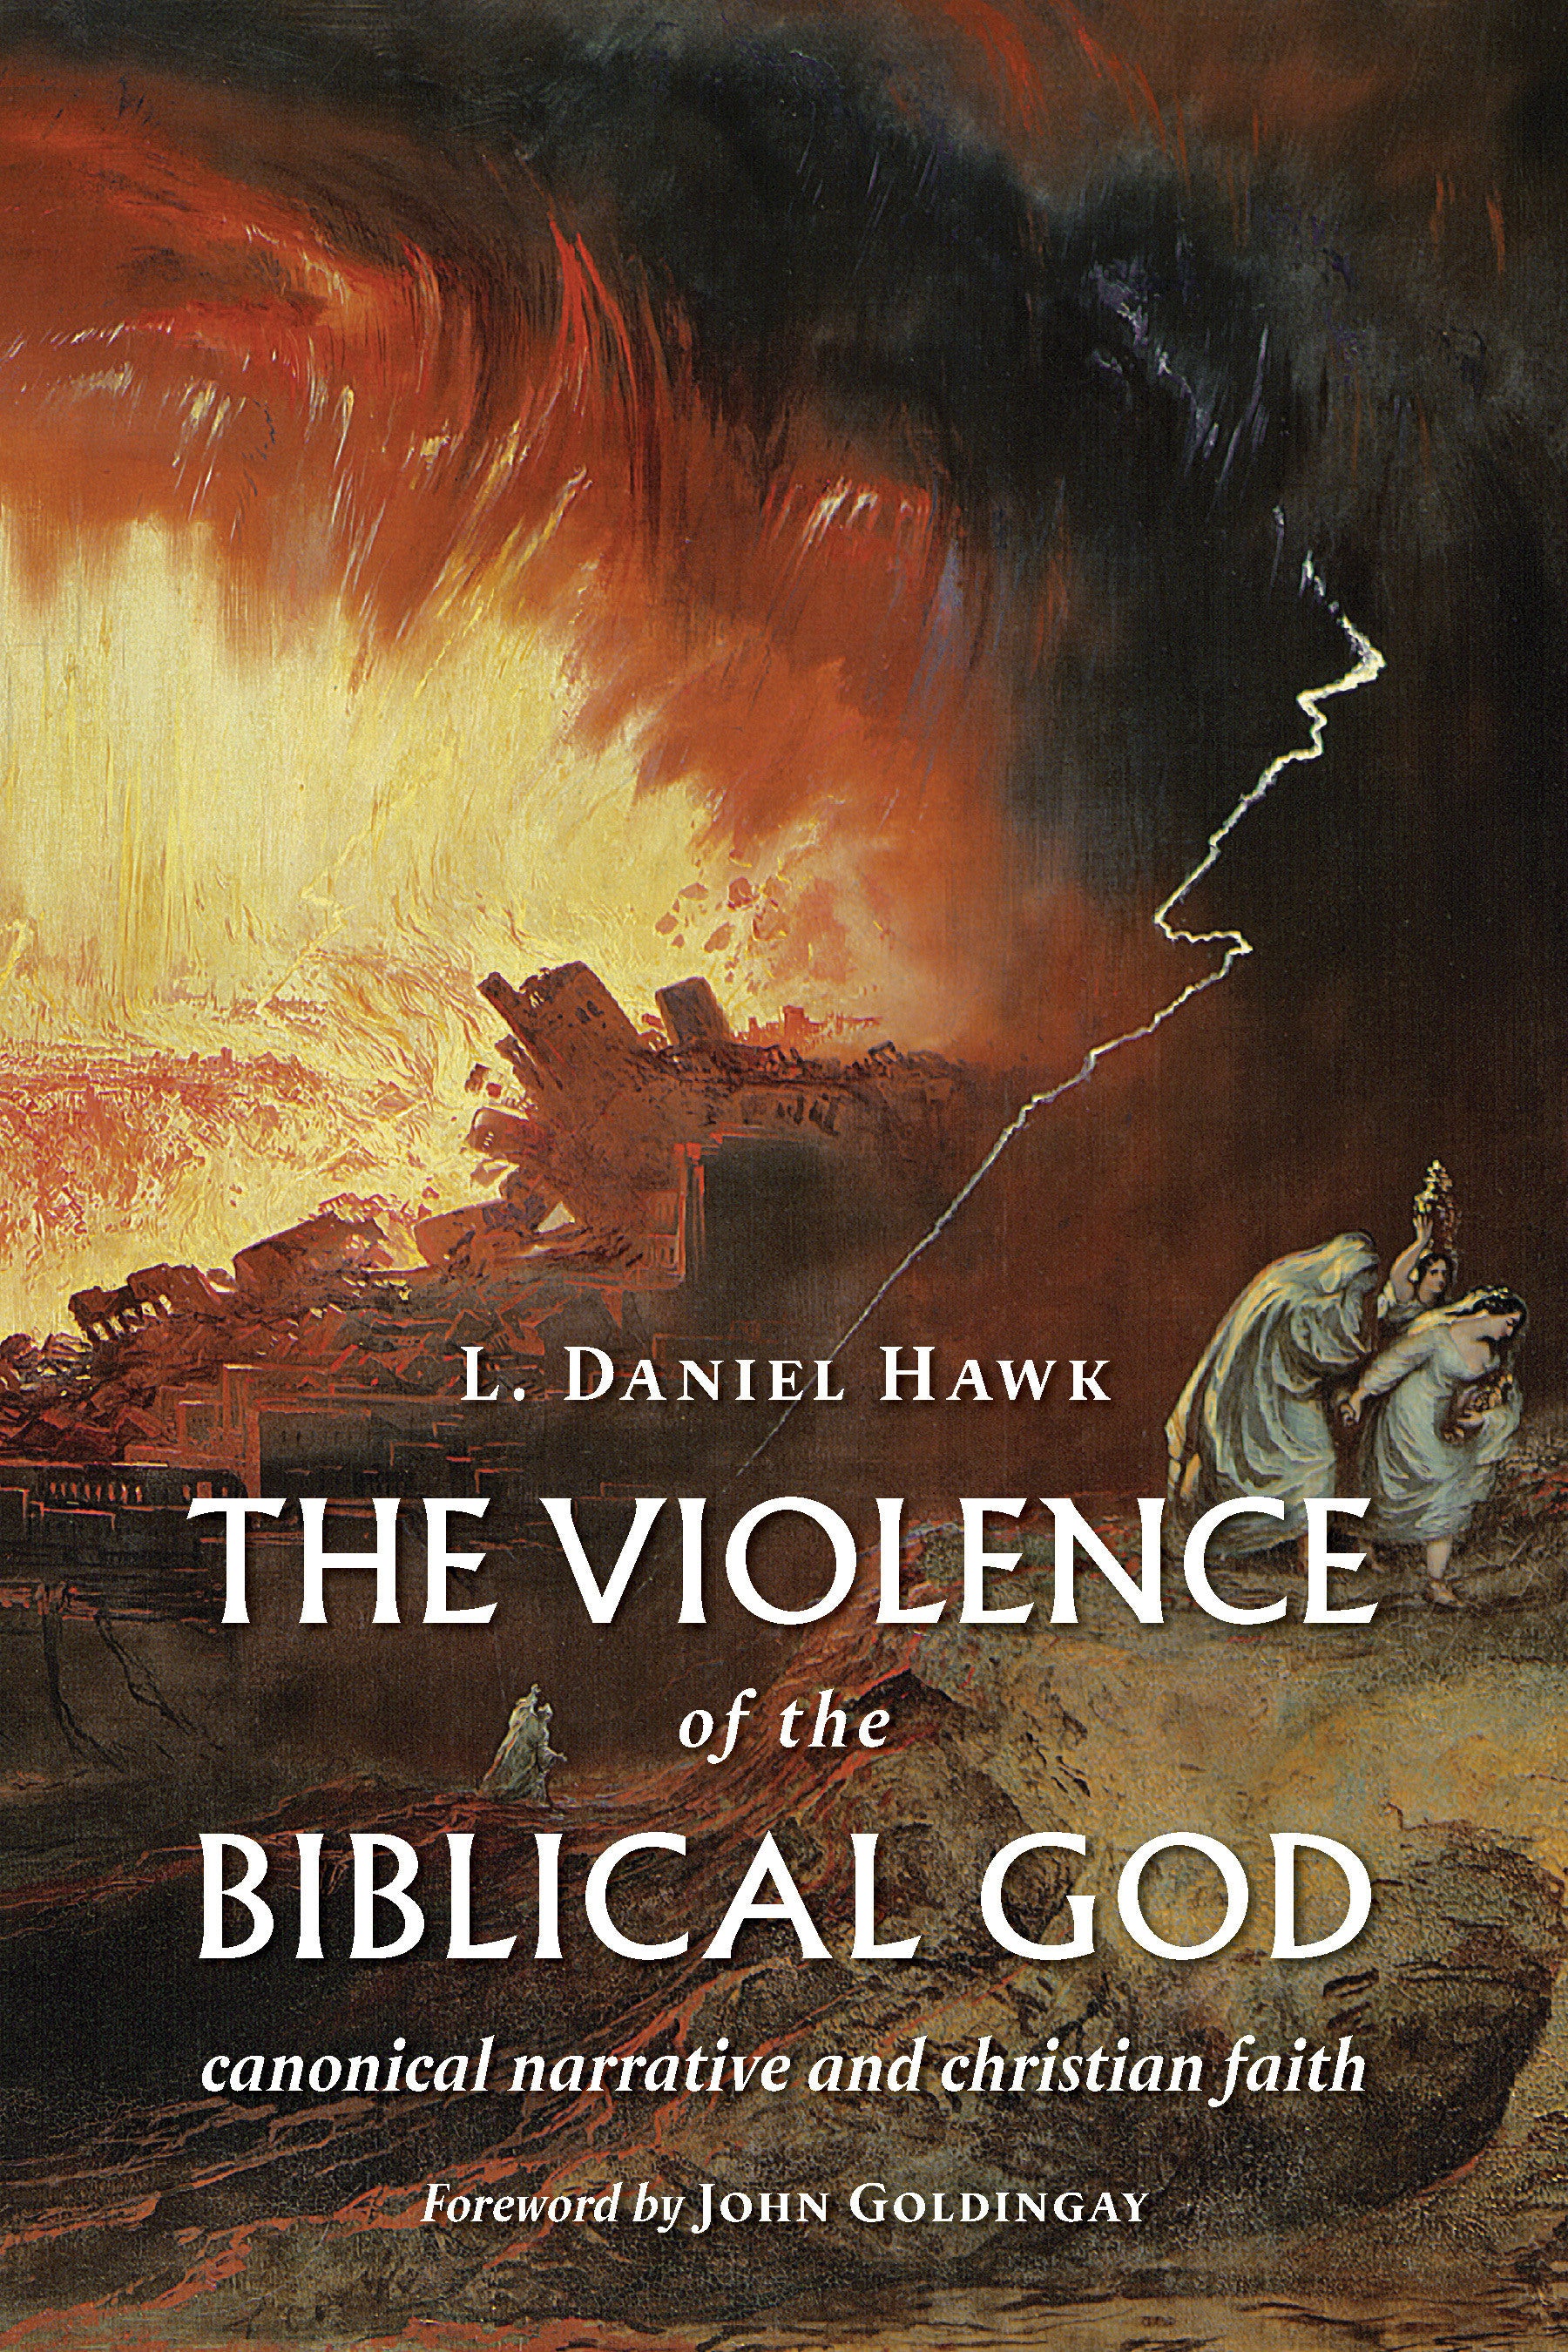 Image of The Violence of the Biblical God other